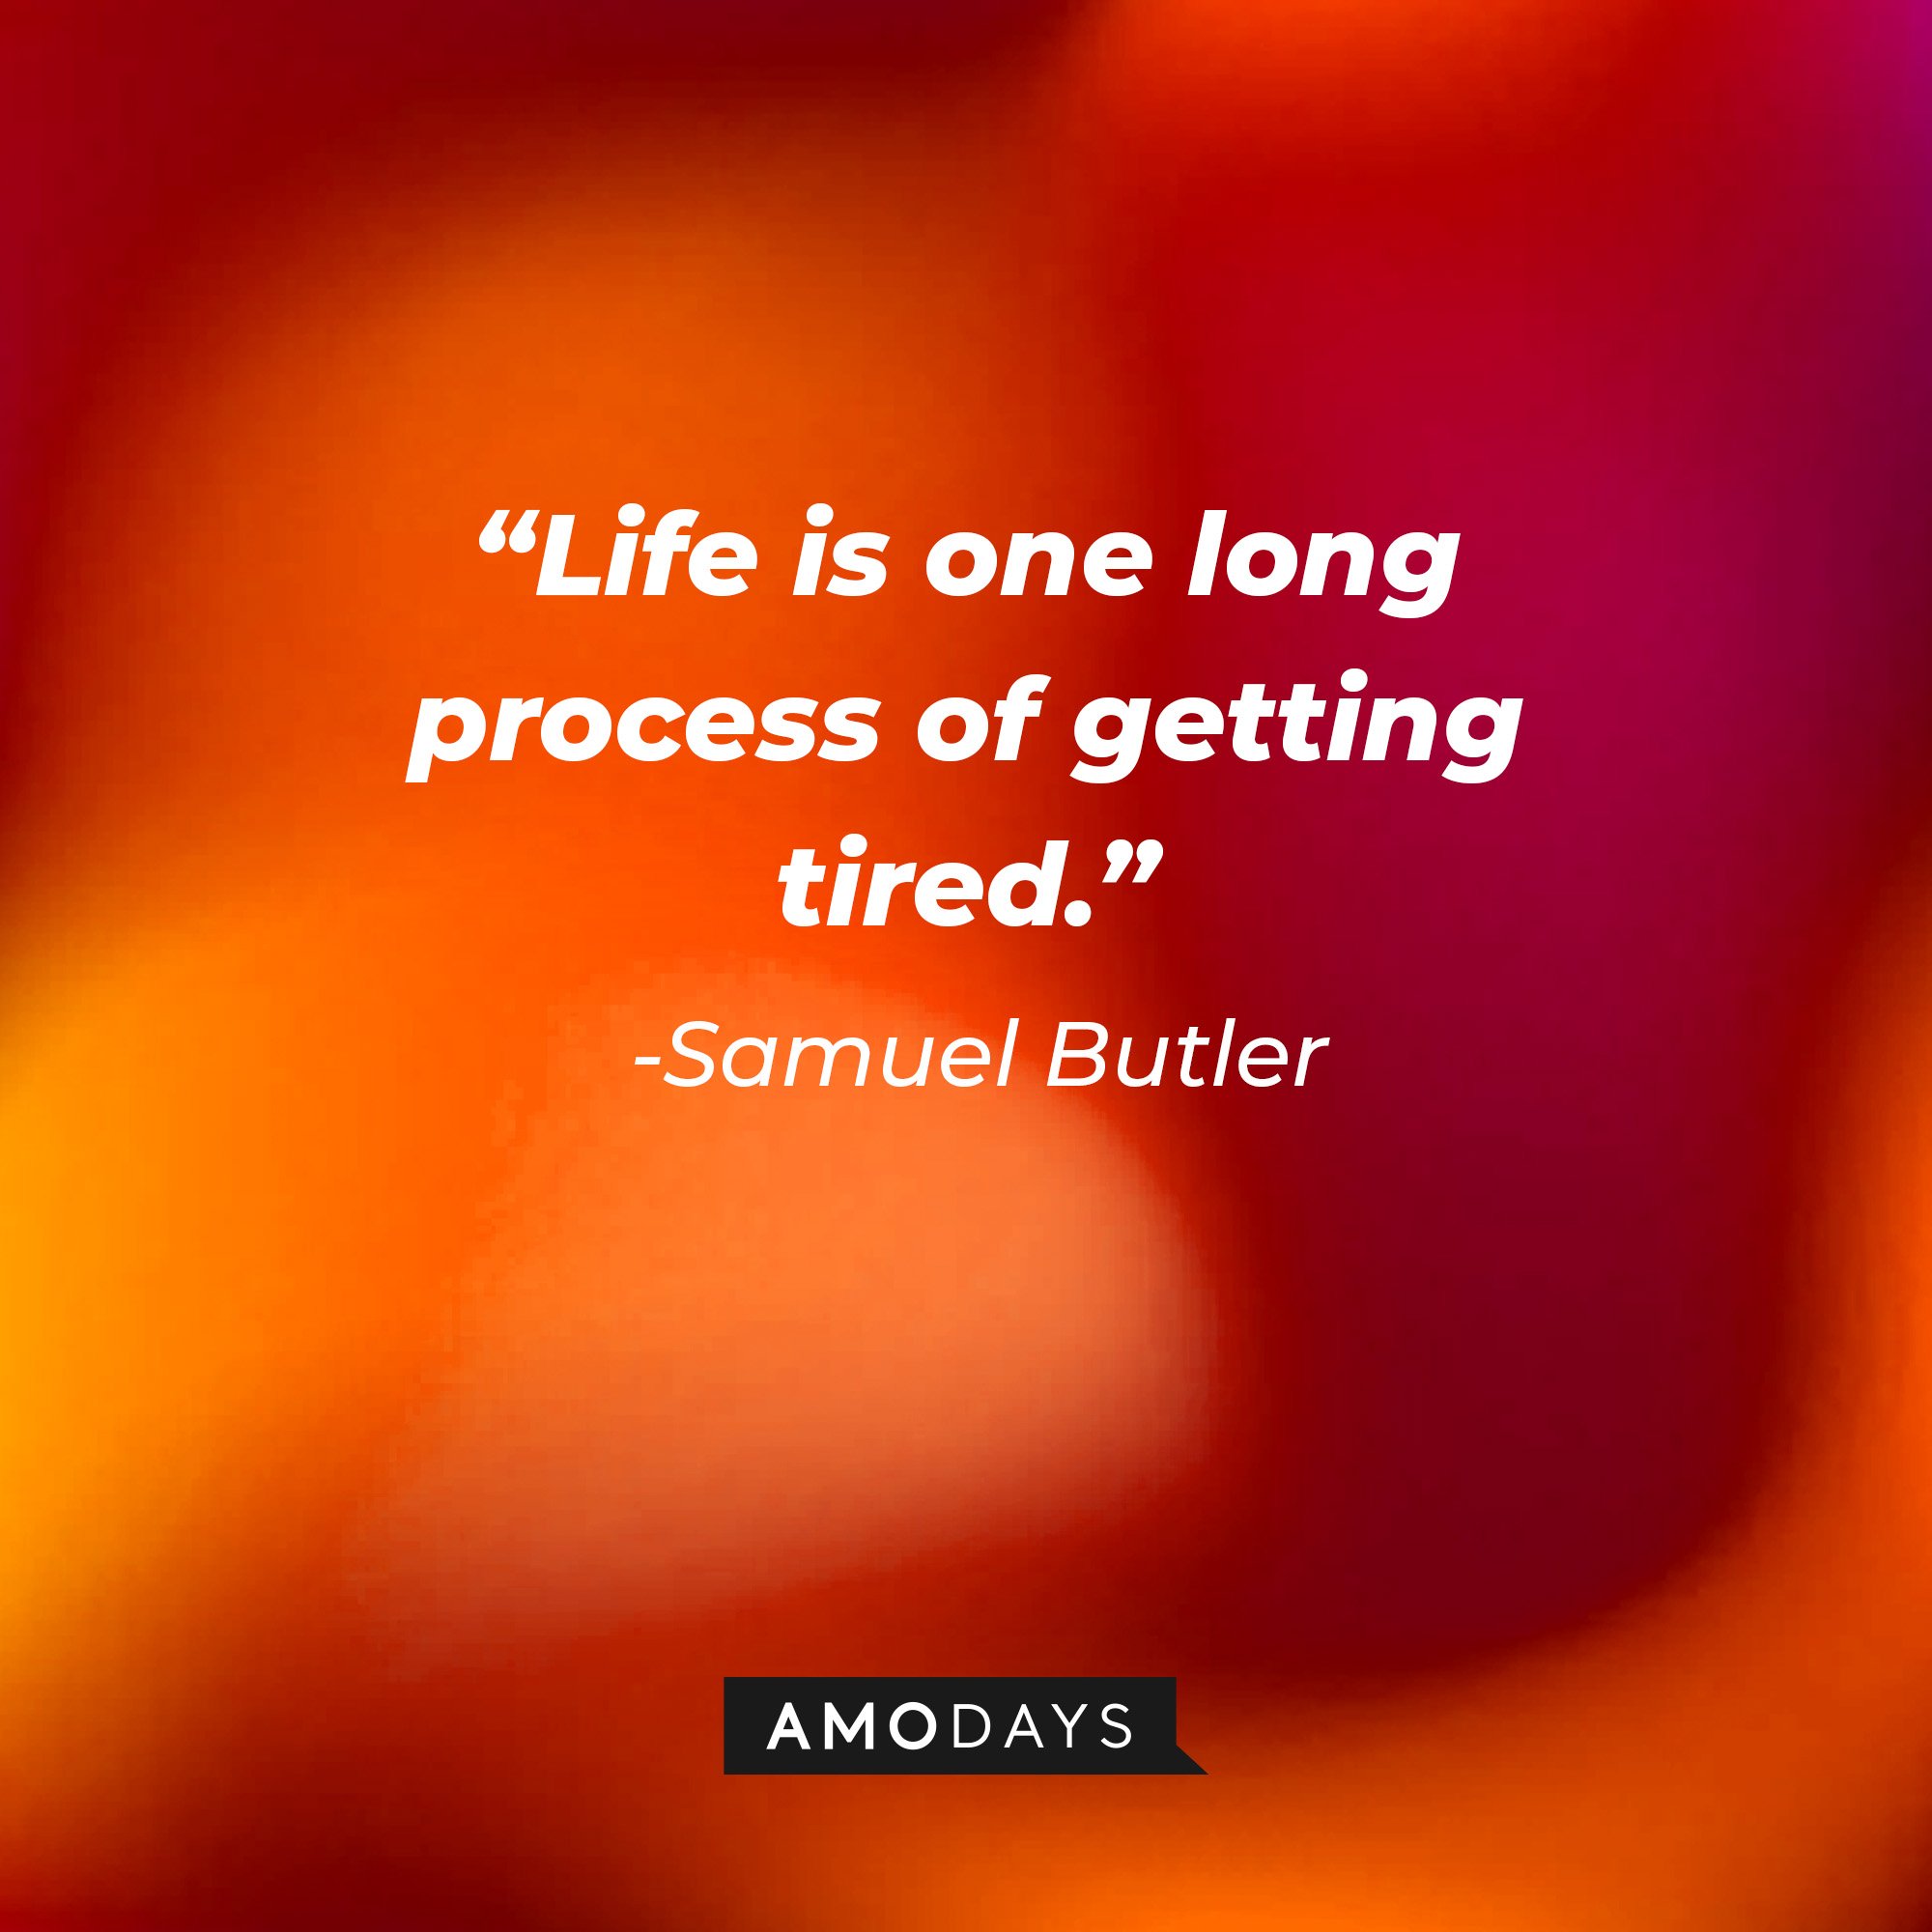 Samuel Butler's quote: “Life is one long process of getting tired.” | Image: AmoDays